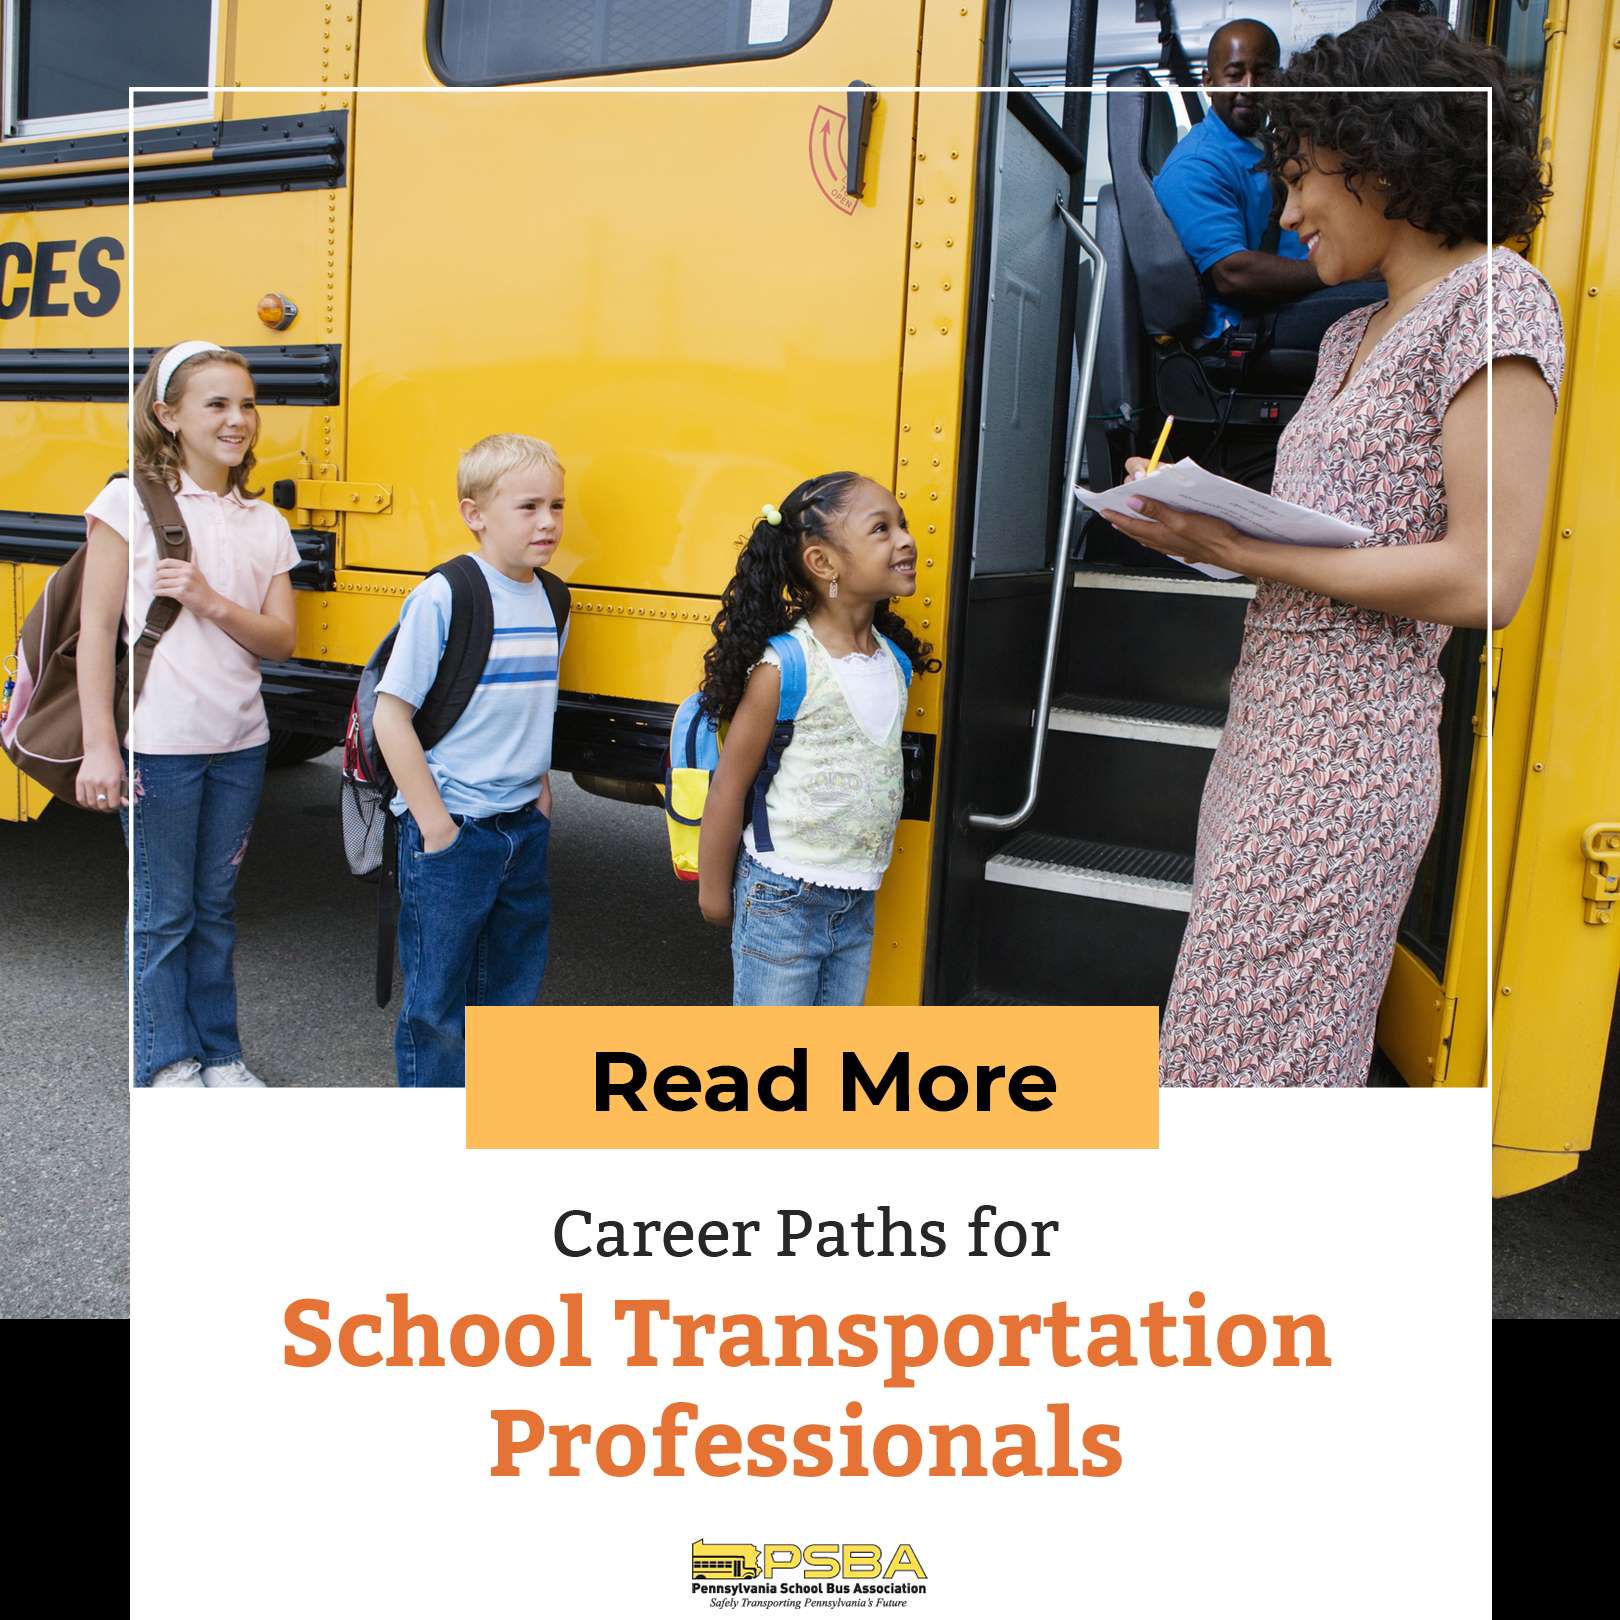 Career Paths for School Transportation Professionals